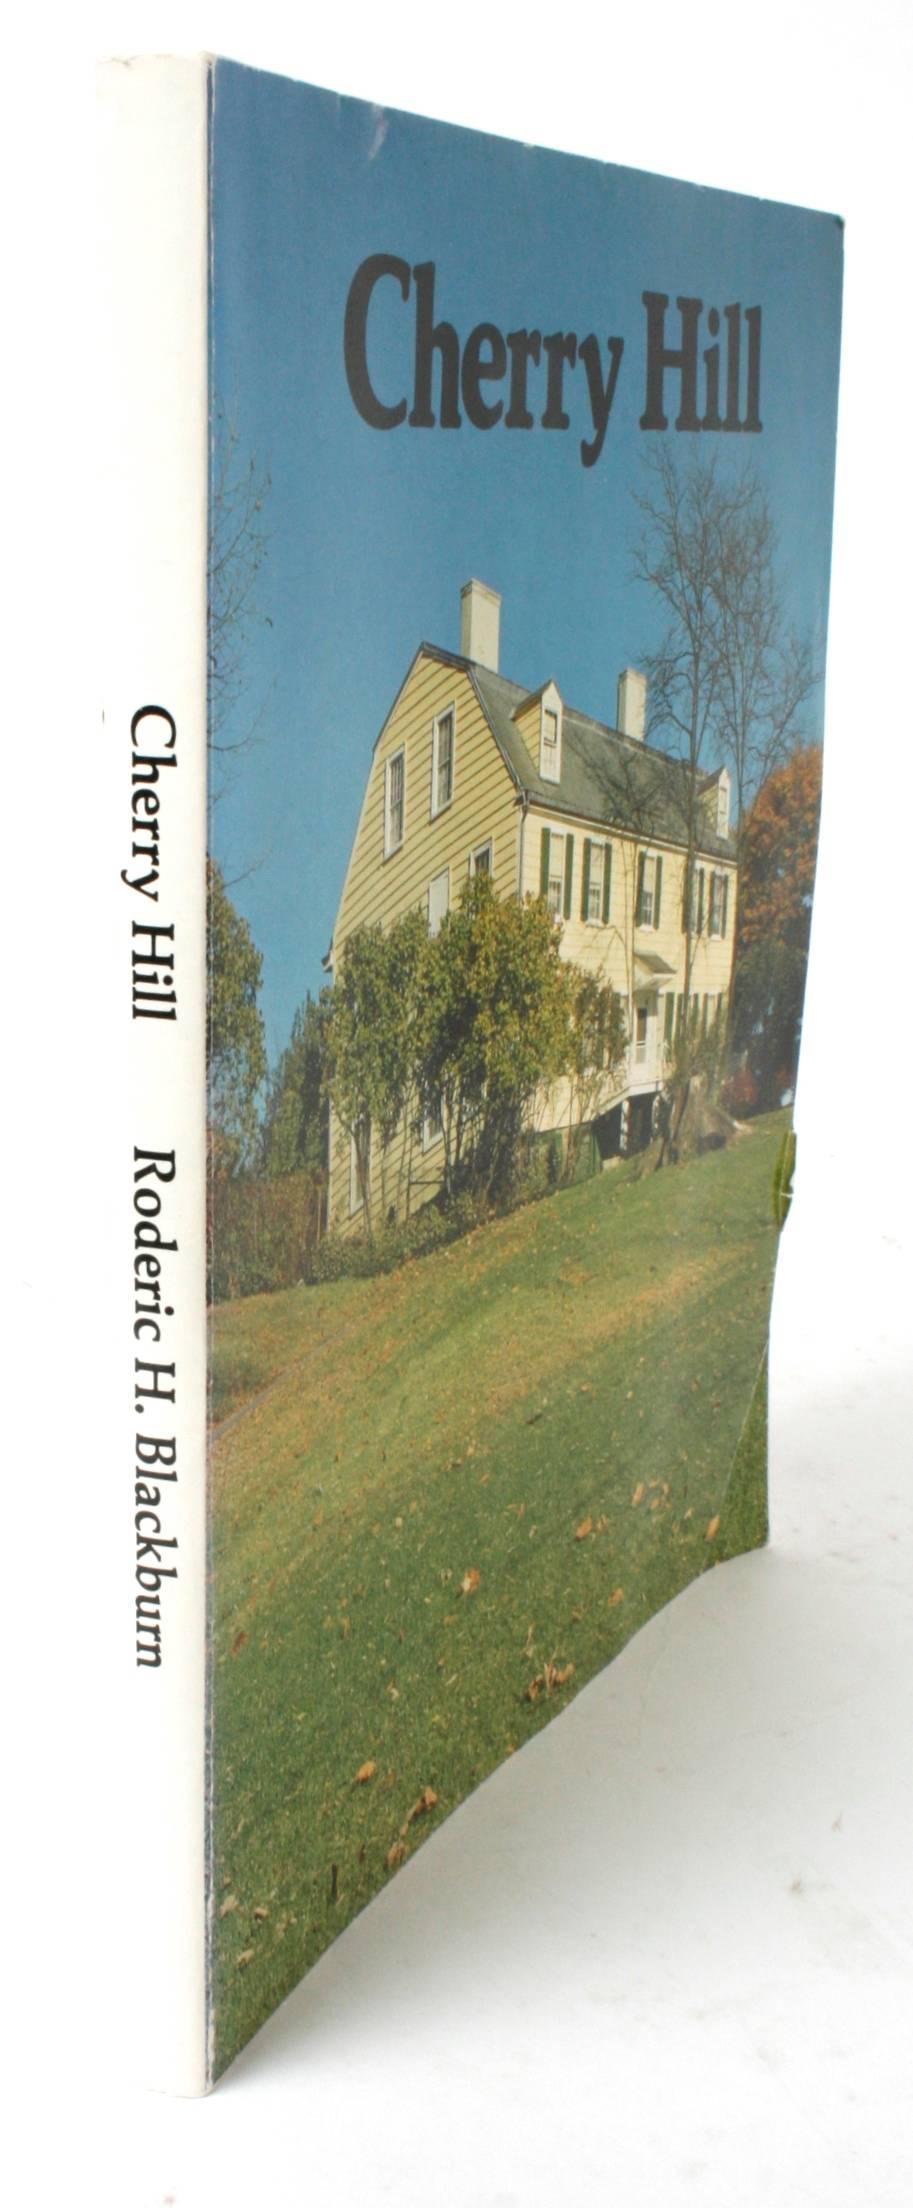 Cherry Hill, The History and Collections of a Van Rensselaer Family by Roderic H. Blackburn. Albany: Historic Cherry Hill, 1976. Softcover. 176 pp. A fascinating book on Cherry Hill, the significant American landmark located in Albany New York. The